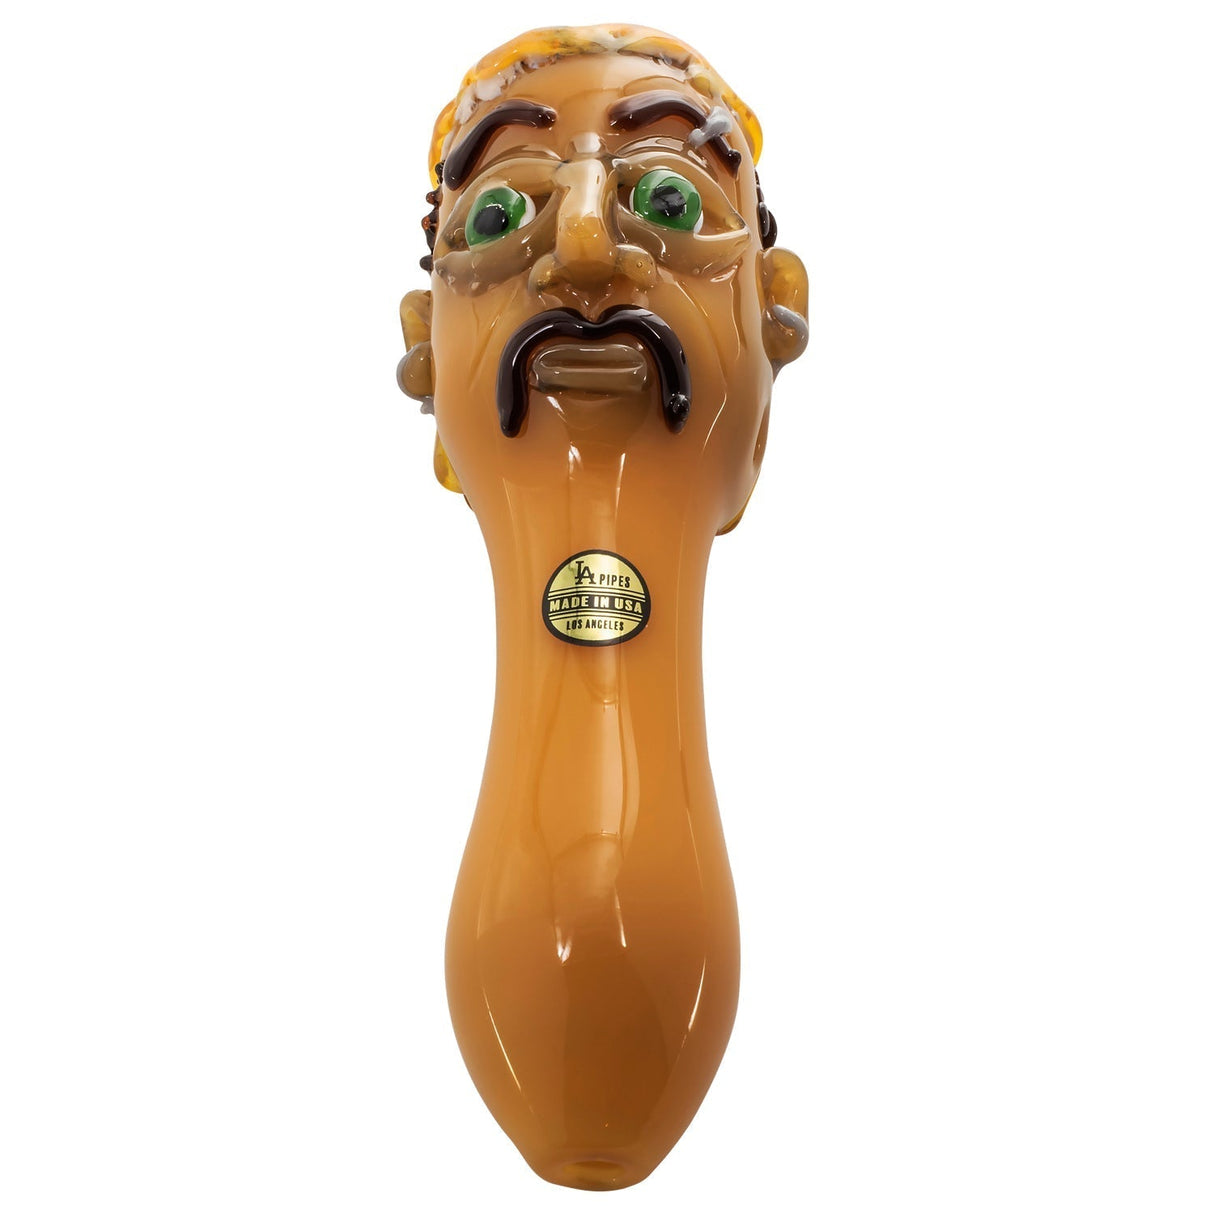 LA Pipes Joe Exotic Hand Pipe, 4" Borosilicate Glass, Front View on White Background